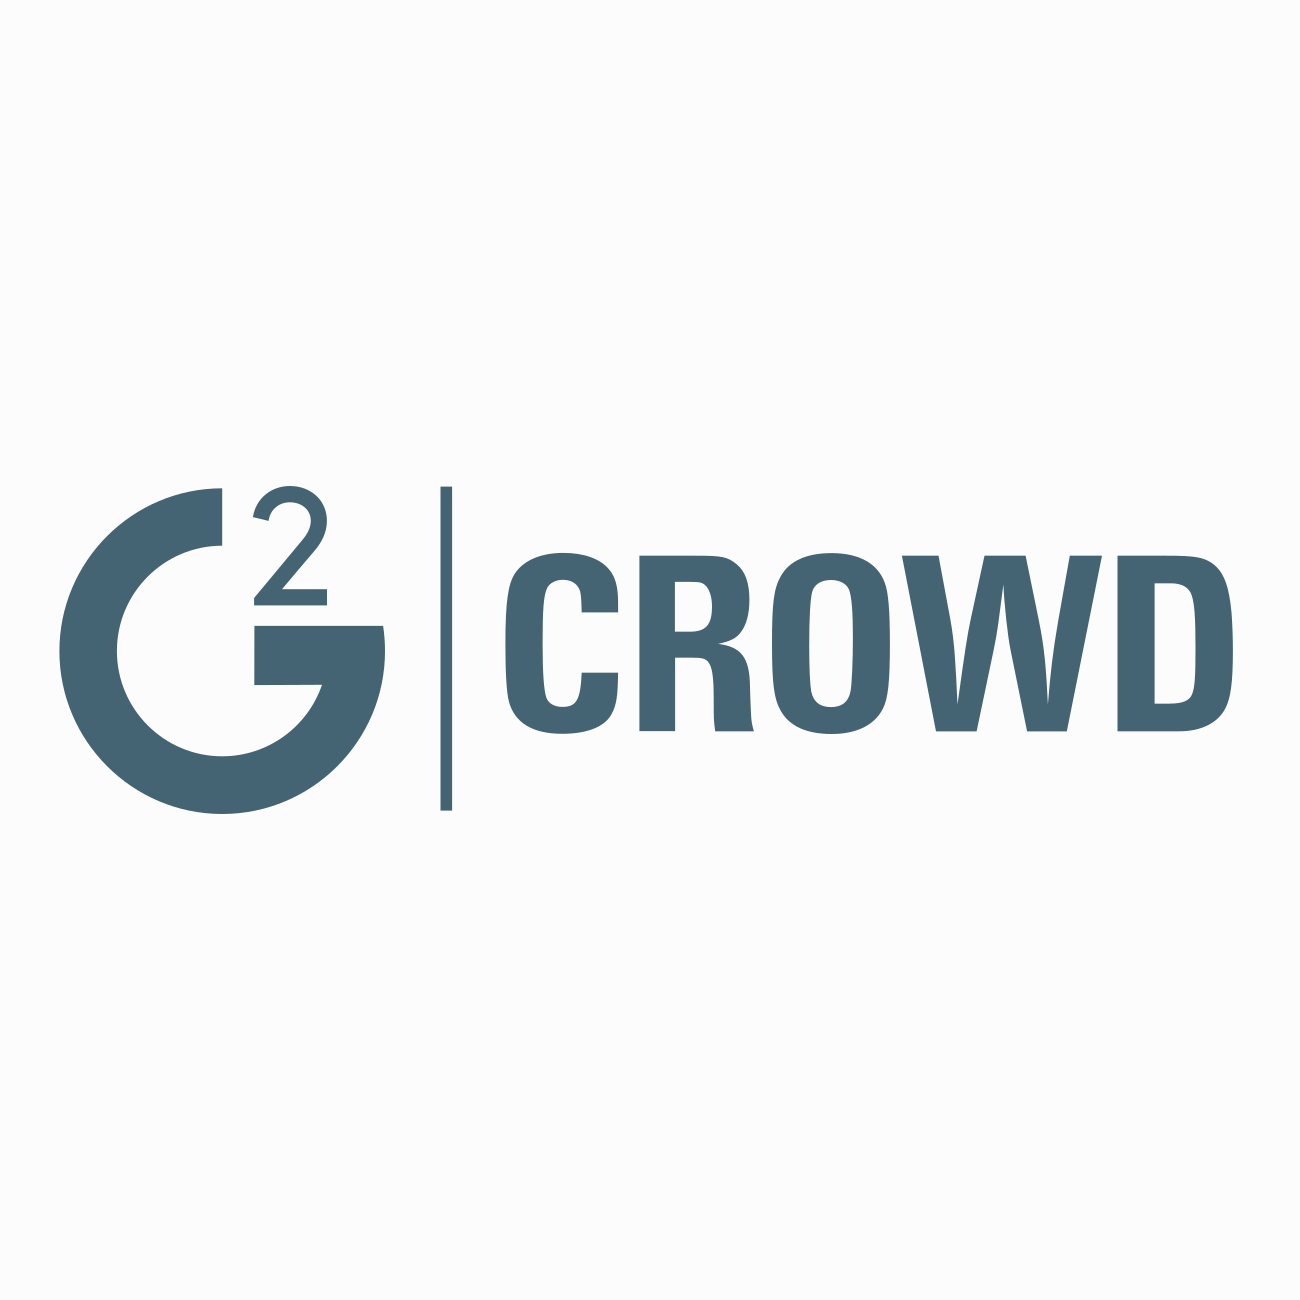 G2 Crowd Names Chief Research Officer Michael Fauscette